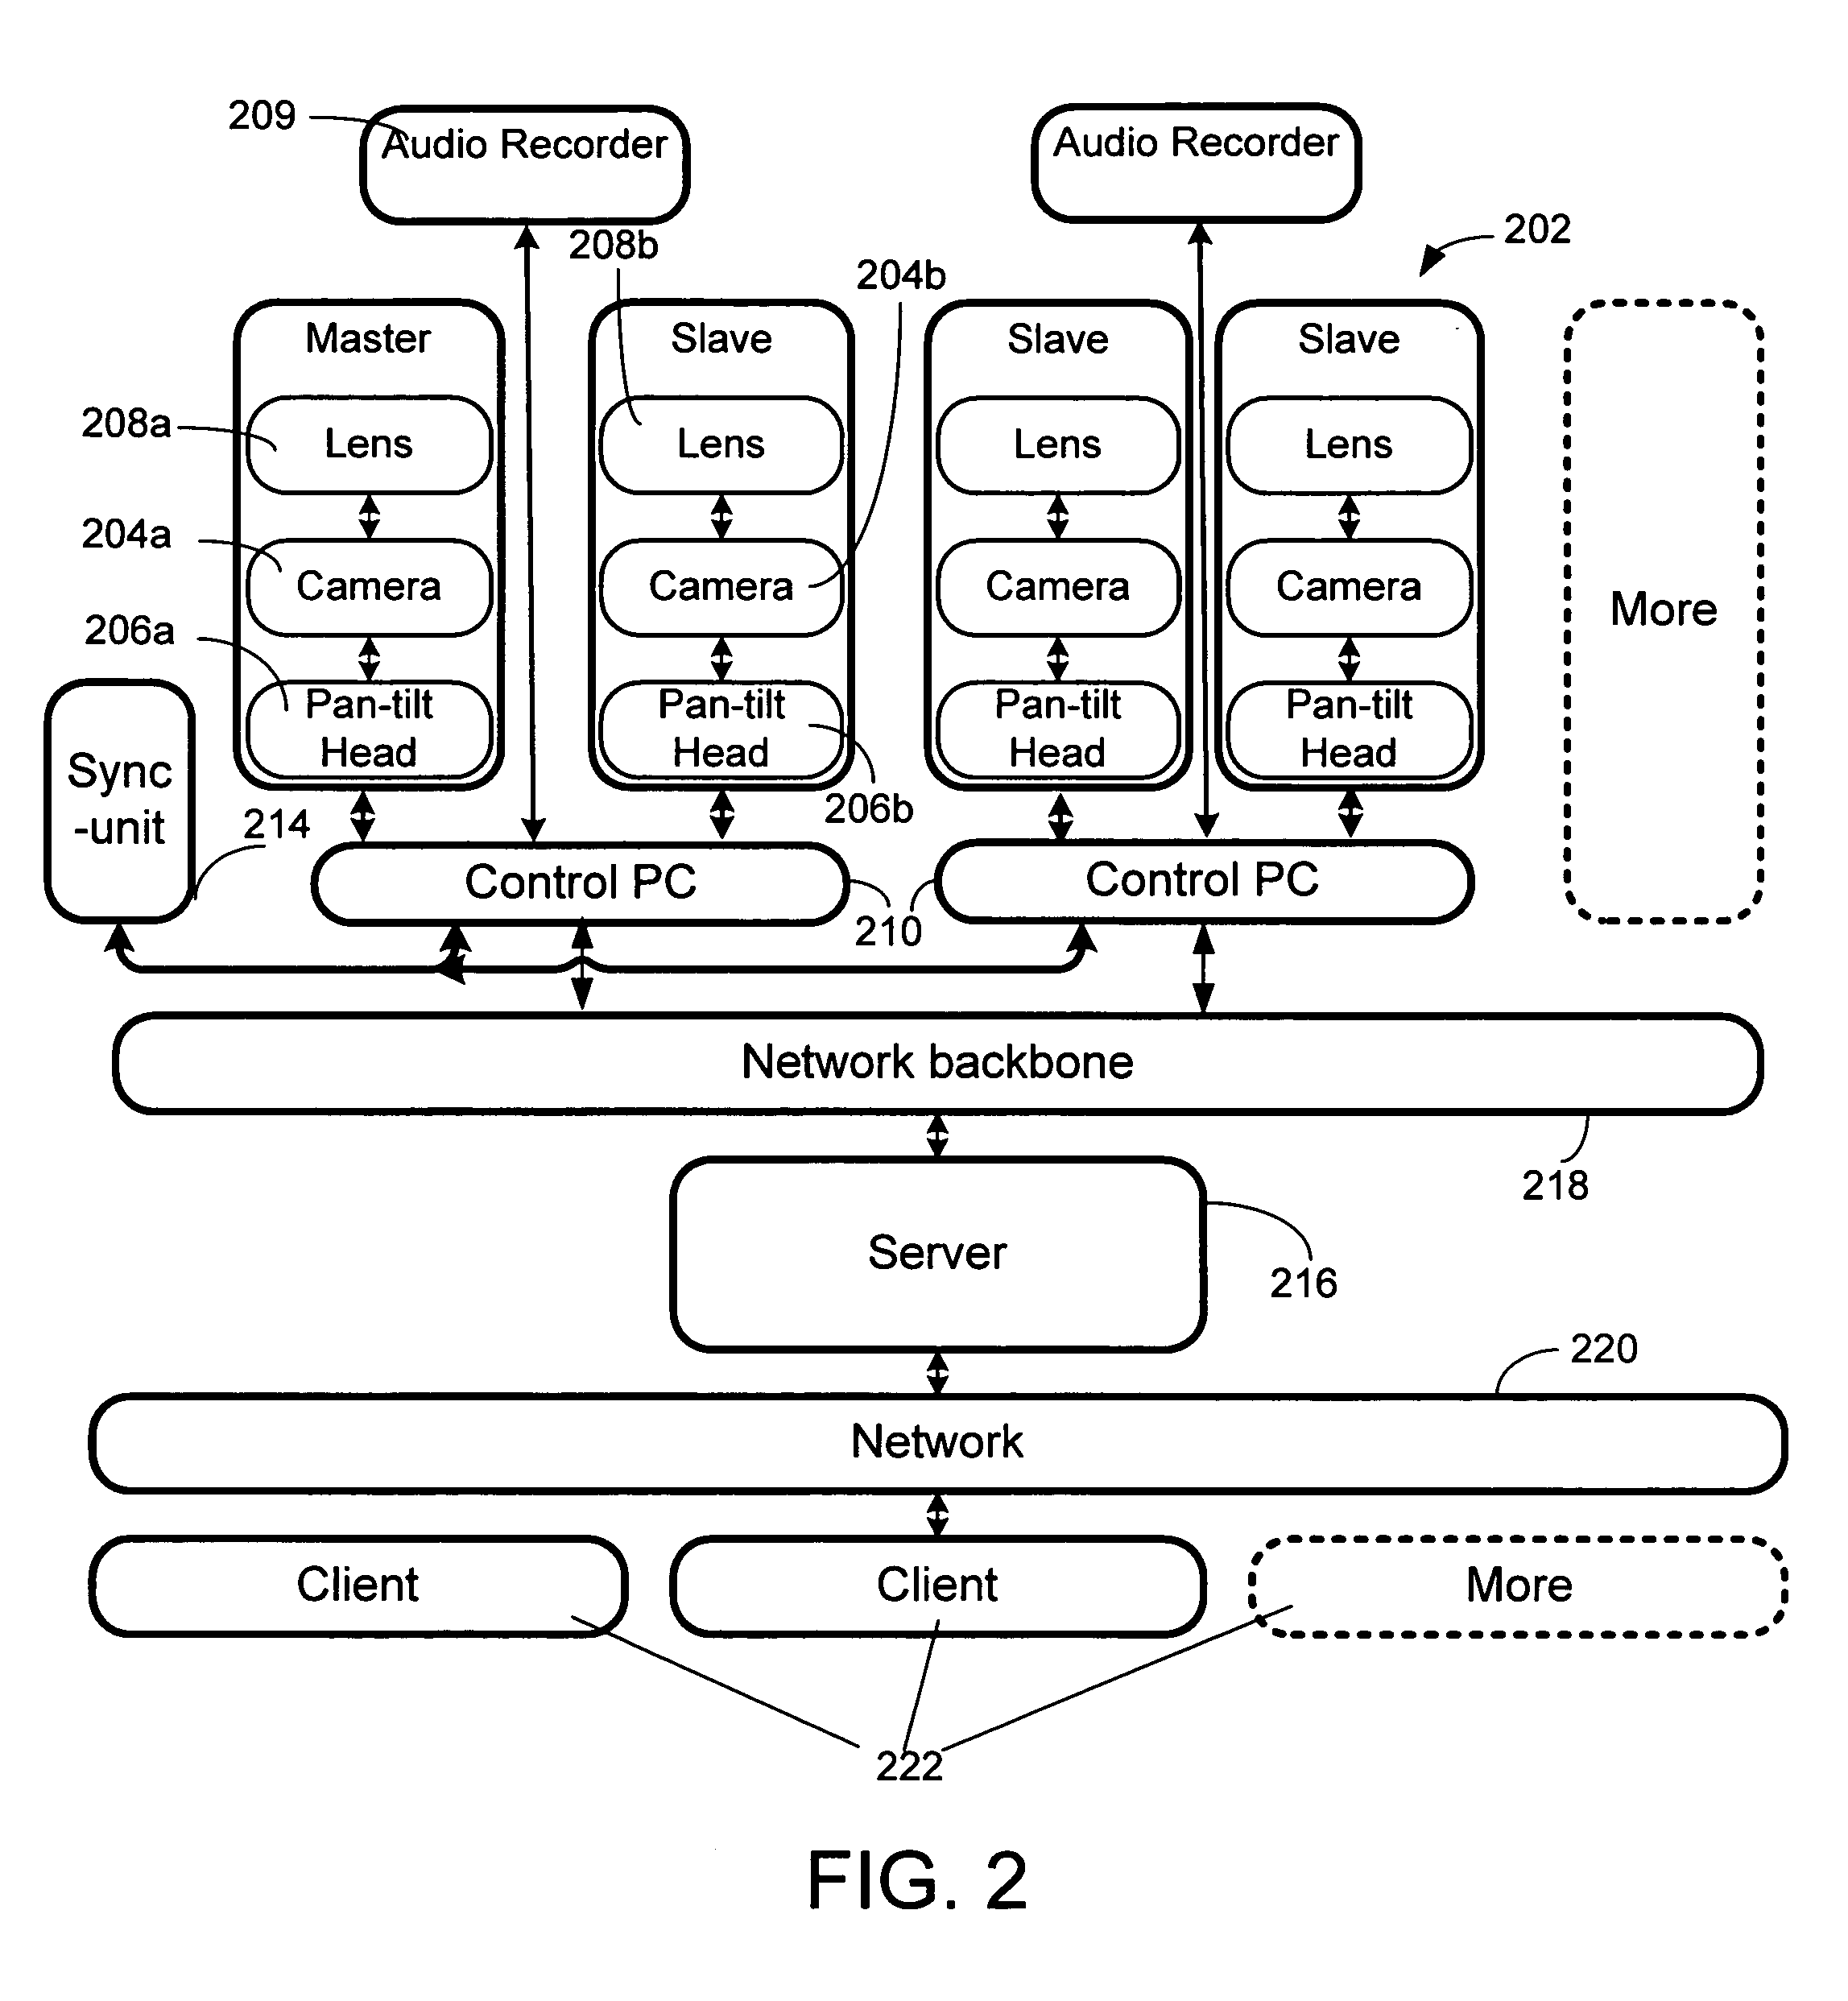 System and Method for Client Services for Interactive Multi-View Video